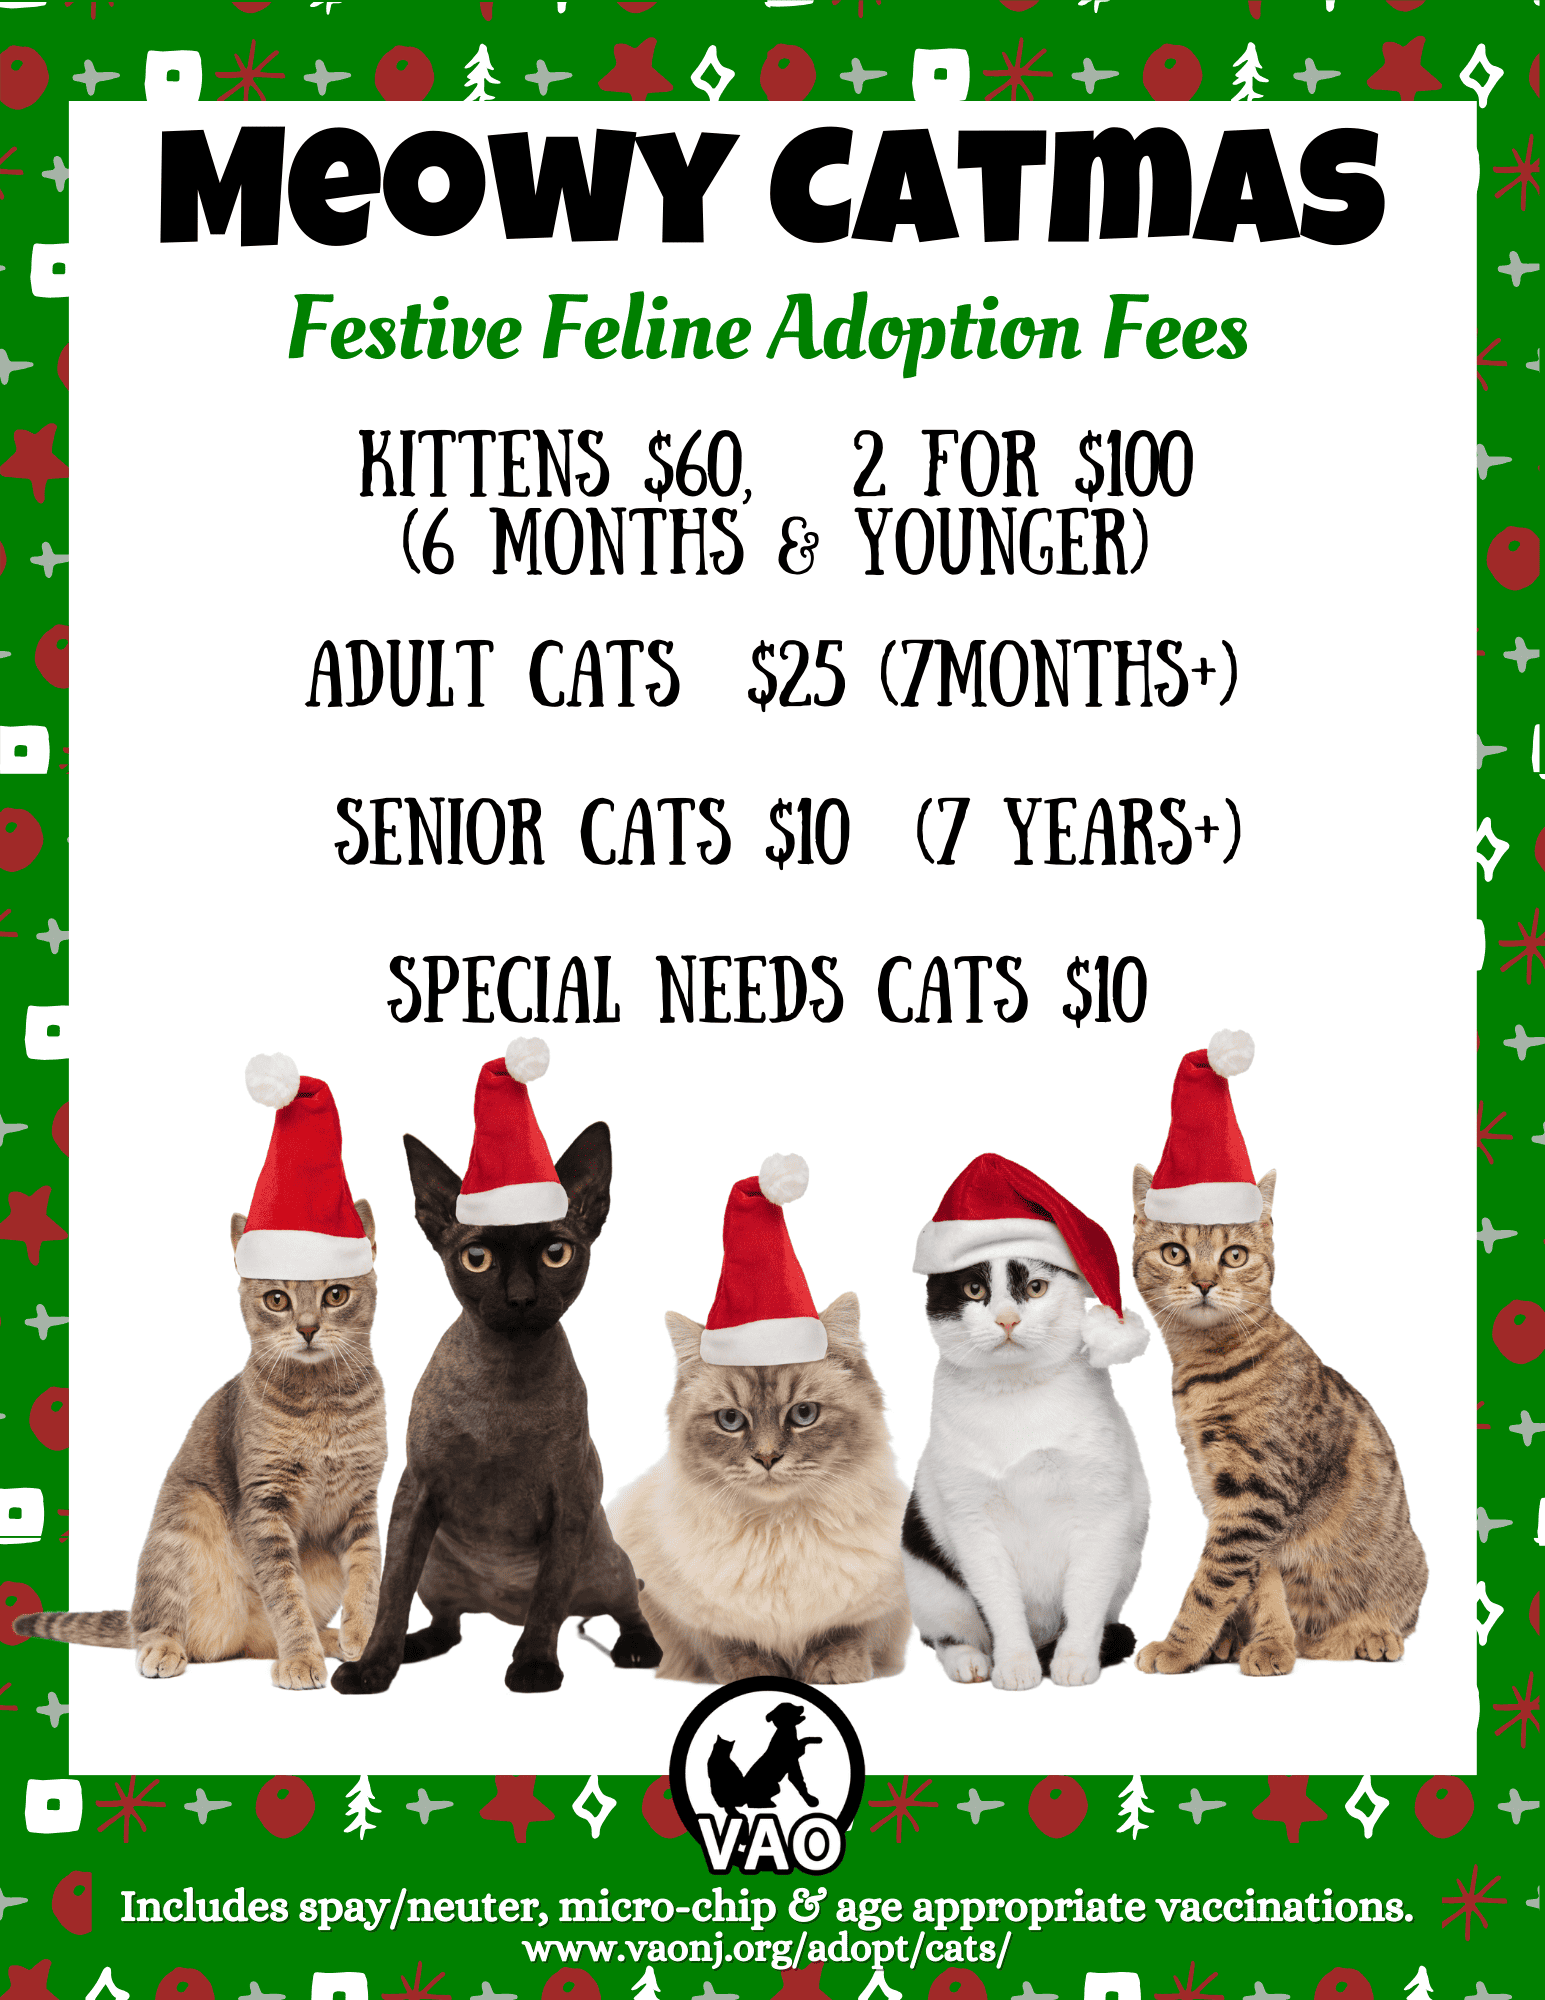 Special Needs Cats: Needing Rescued Or Adopted